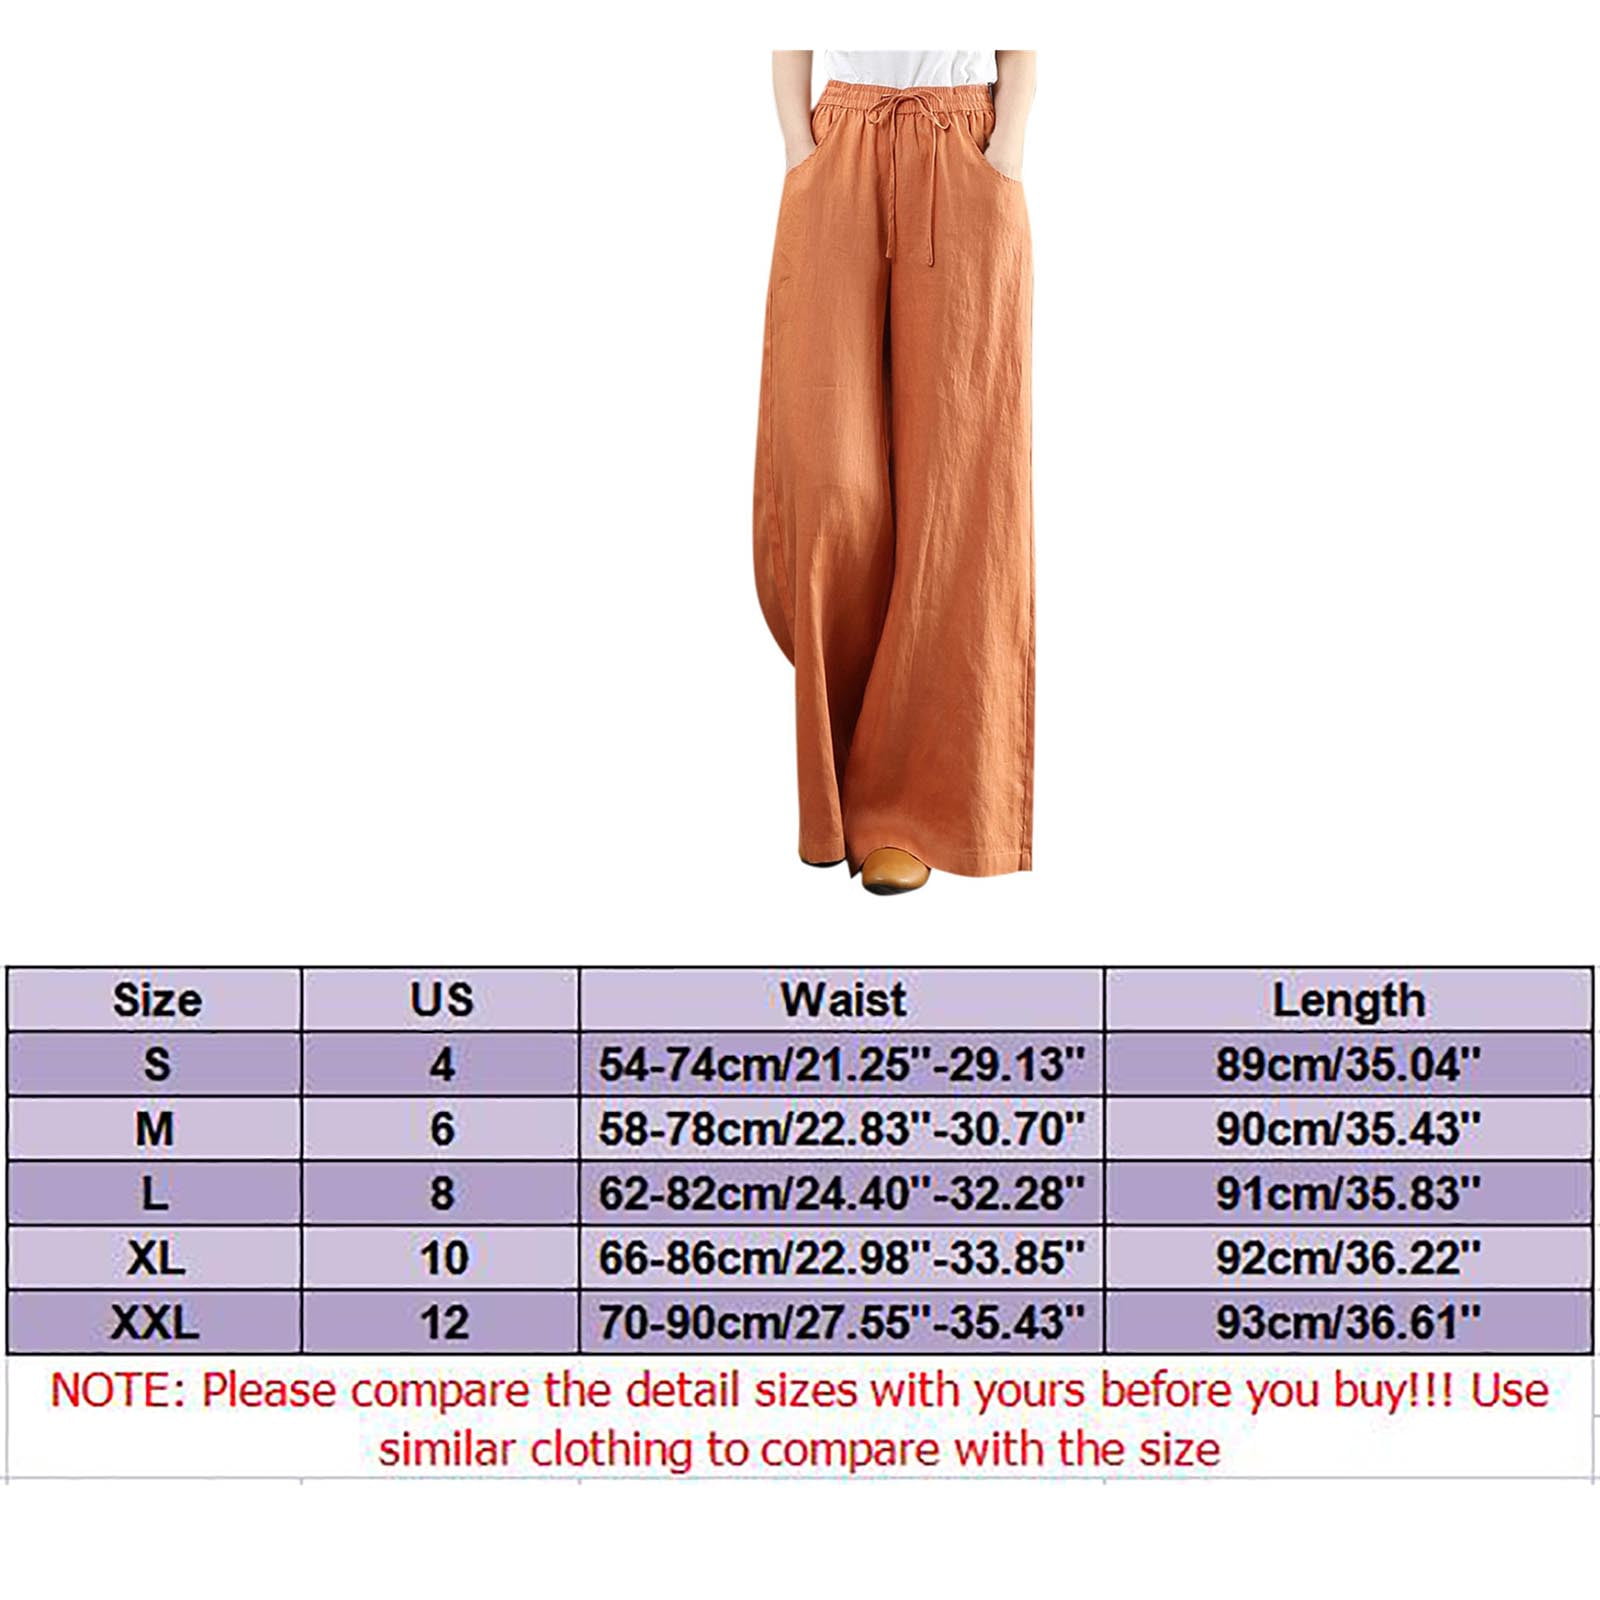 HOW'ON Women's Elastic Waist Wide Leg Casual Palazzo Capri Culottes Pants  Soft Knit Cropped Pants Blue S at Amazon Women's Clothing store